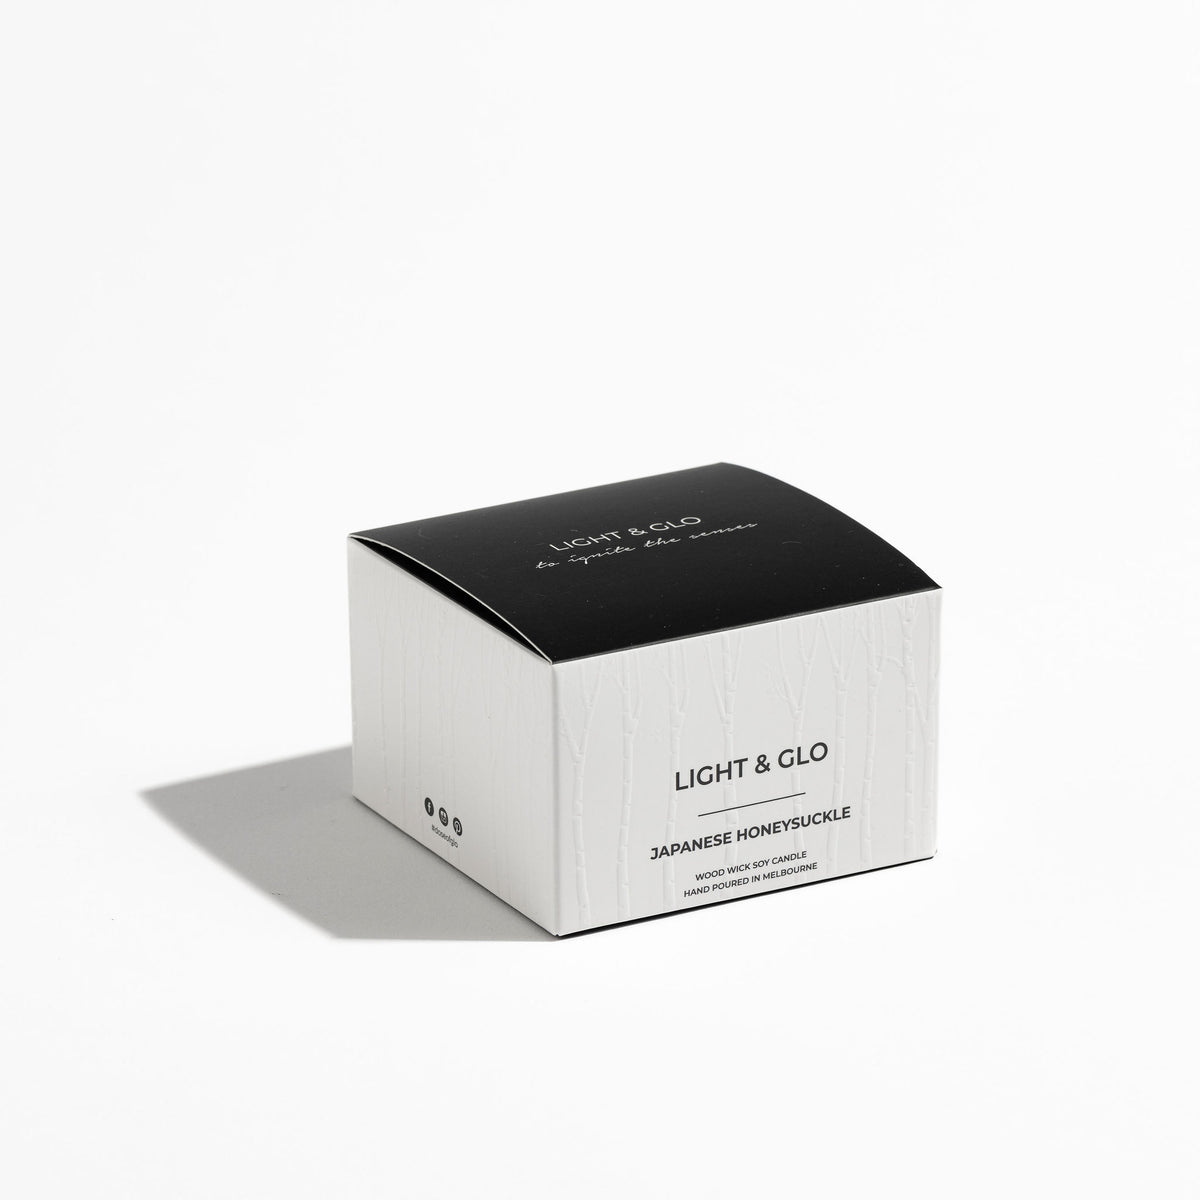 Japanese Honeysuckle - Monochrome Travel Candle | Luxury Candles &amp; Home Fragrances by Light + Glo